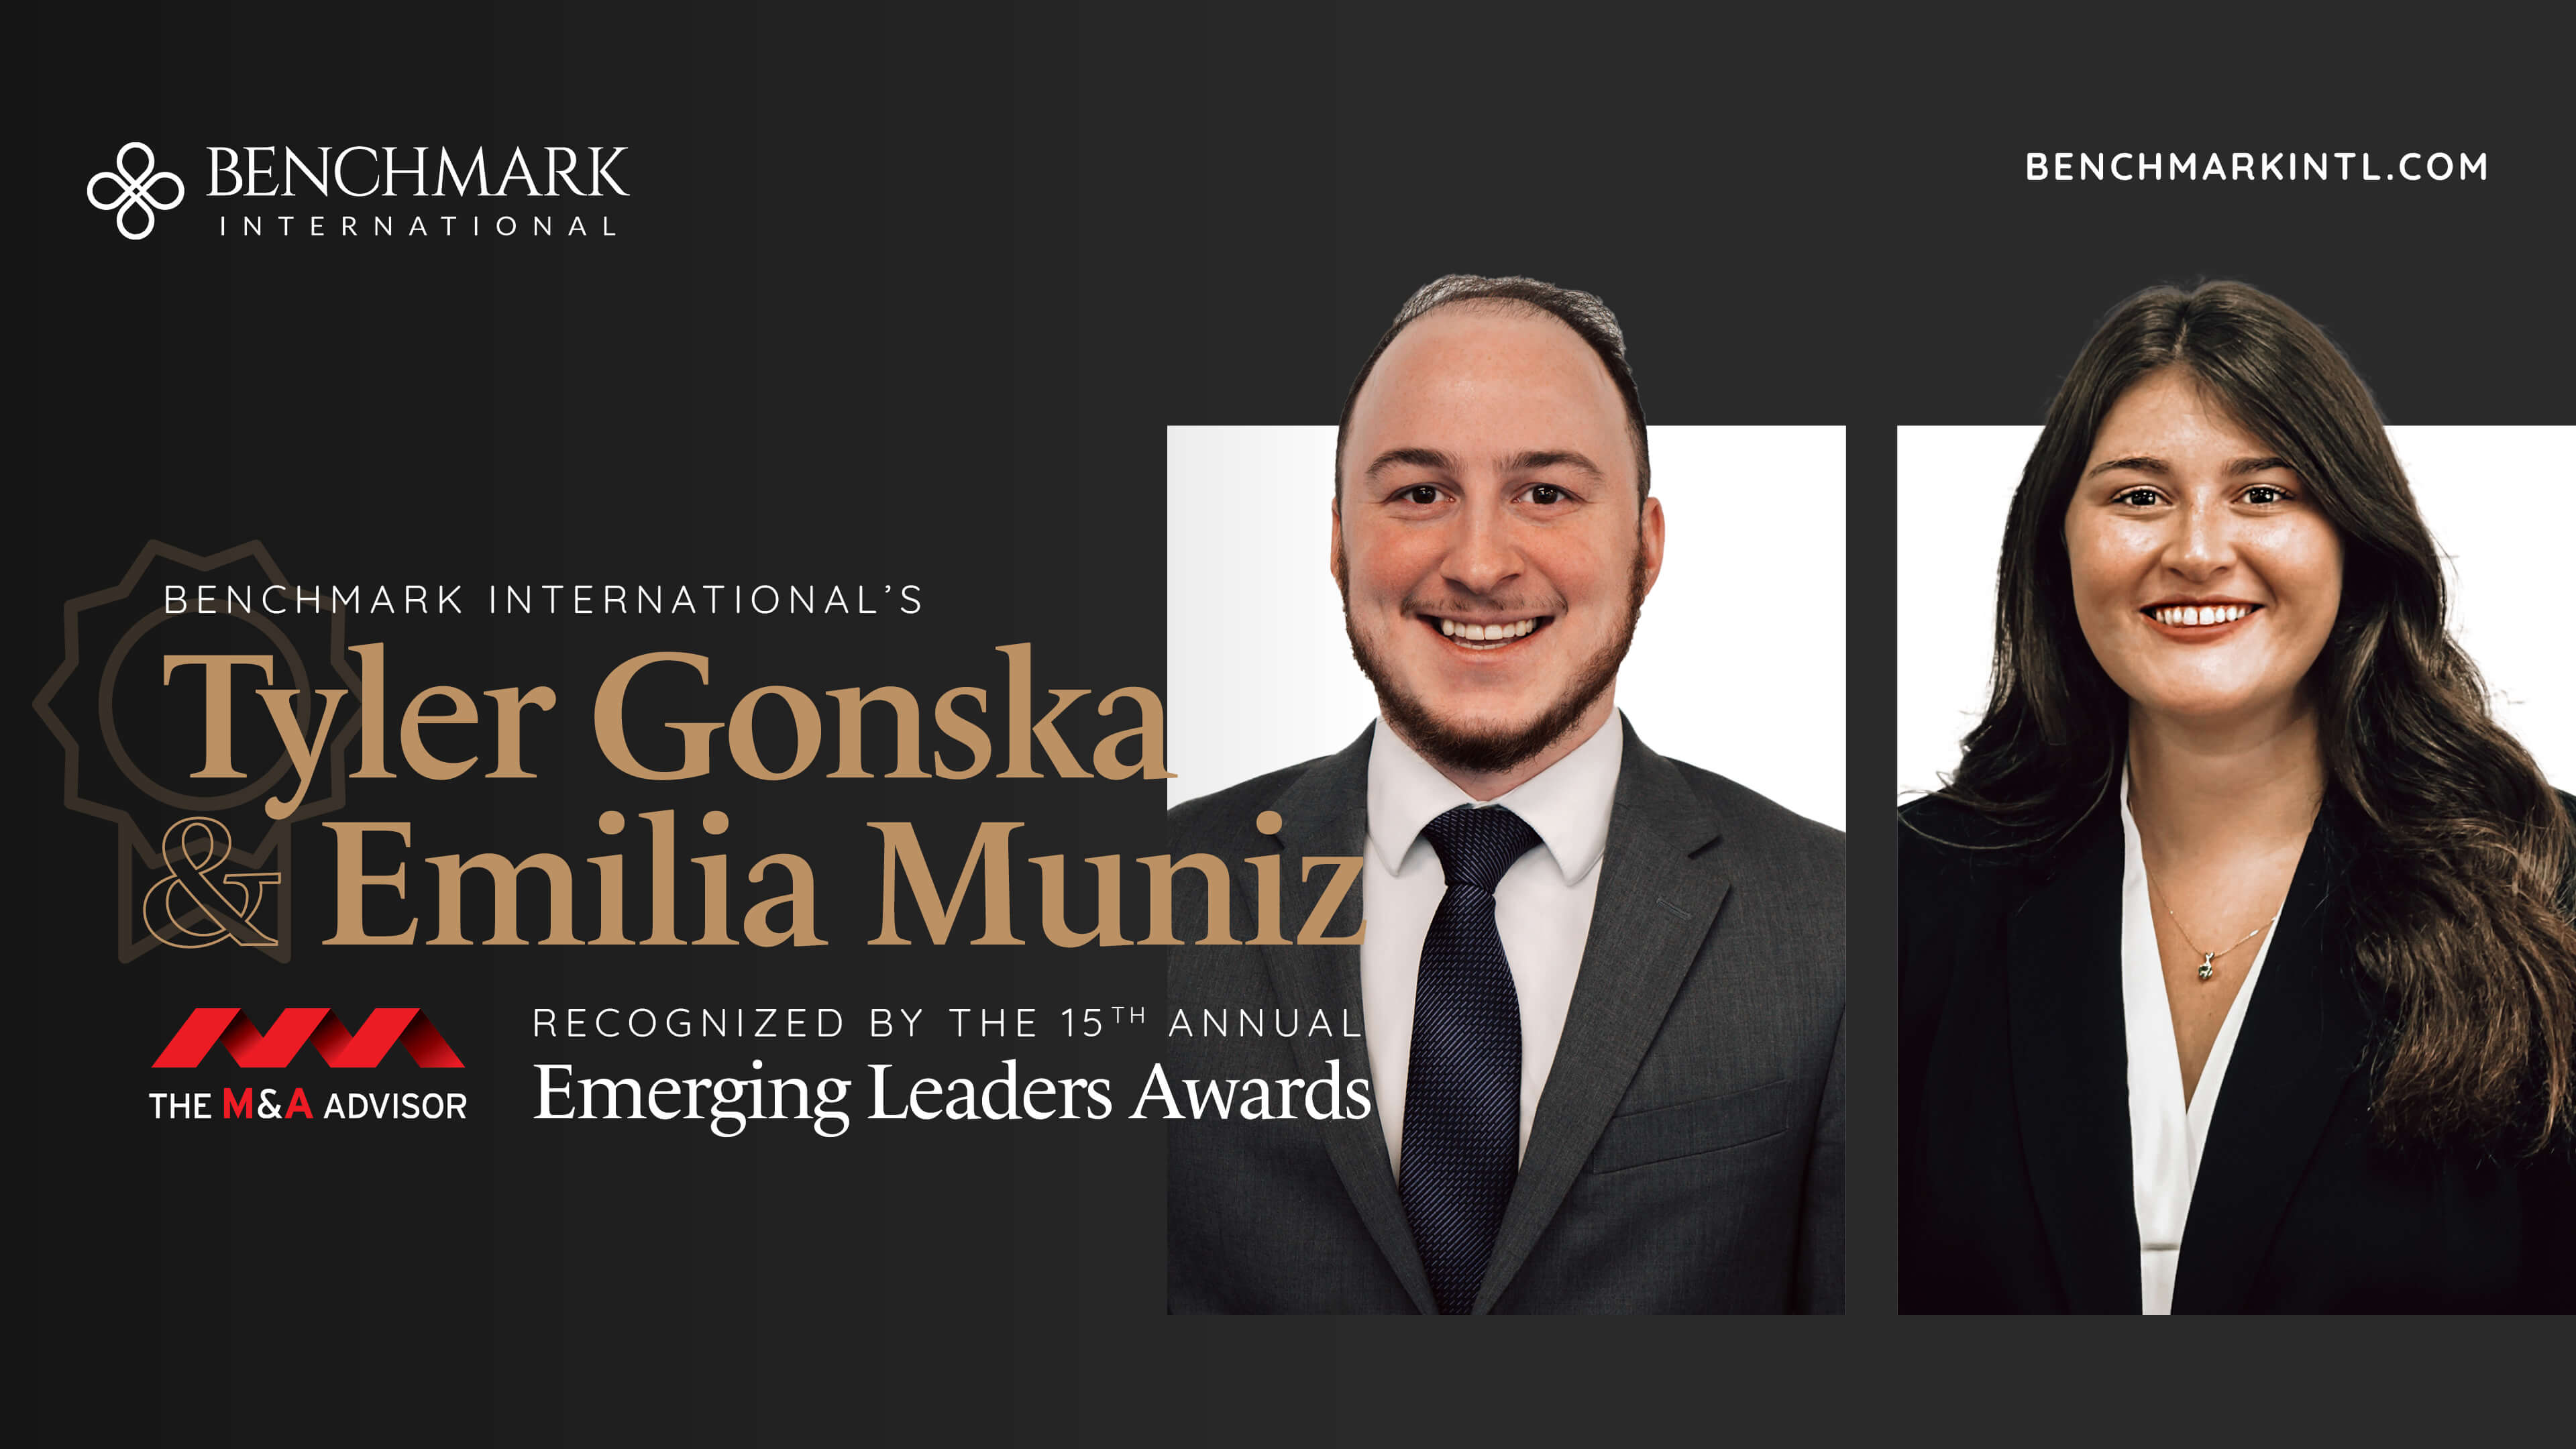 Benchmark's Tyler Gonska And Emilia Muniz Recognized By The 15th Annual Emerging Leaders Awards